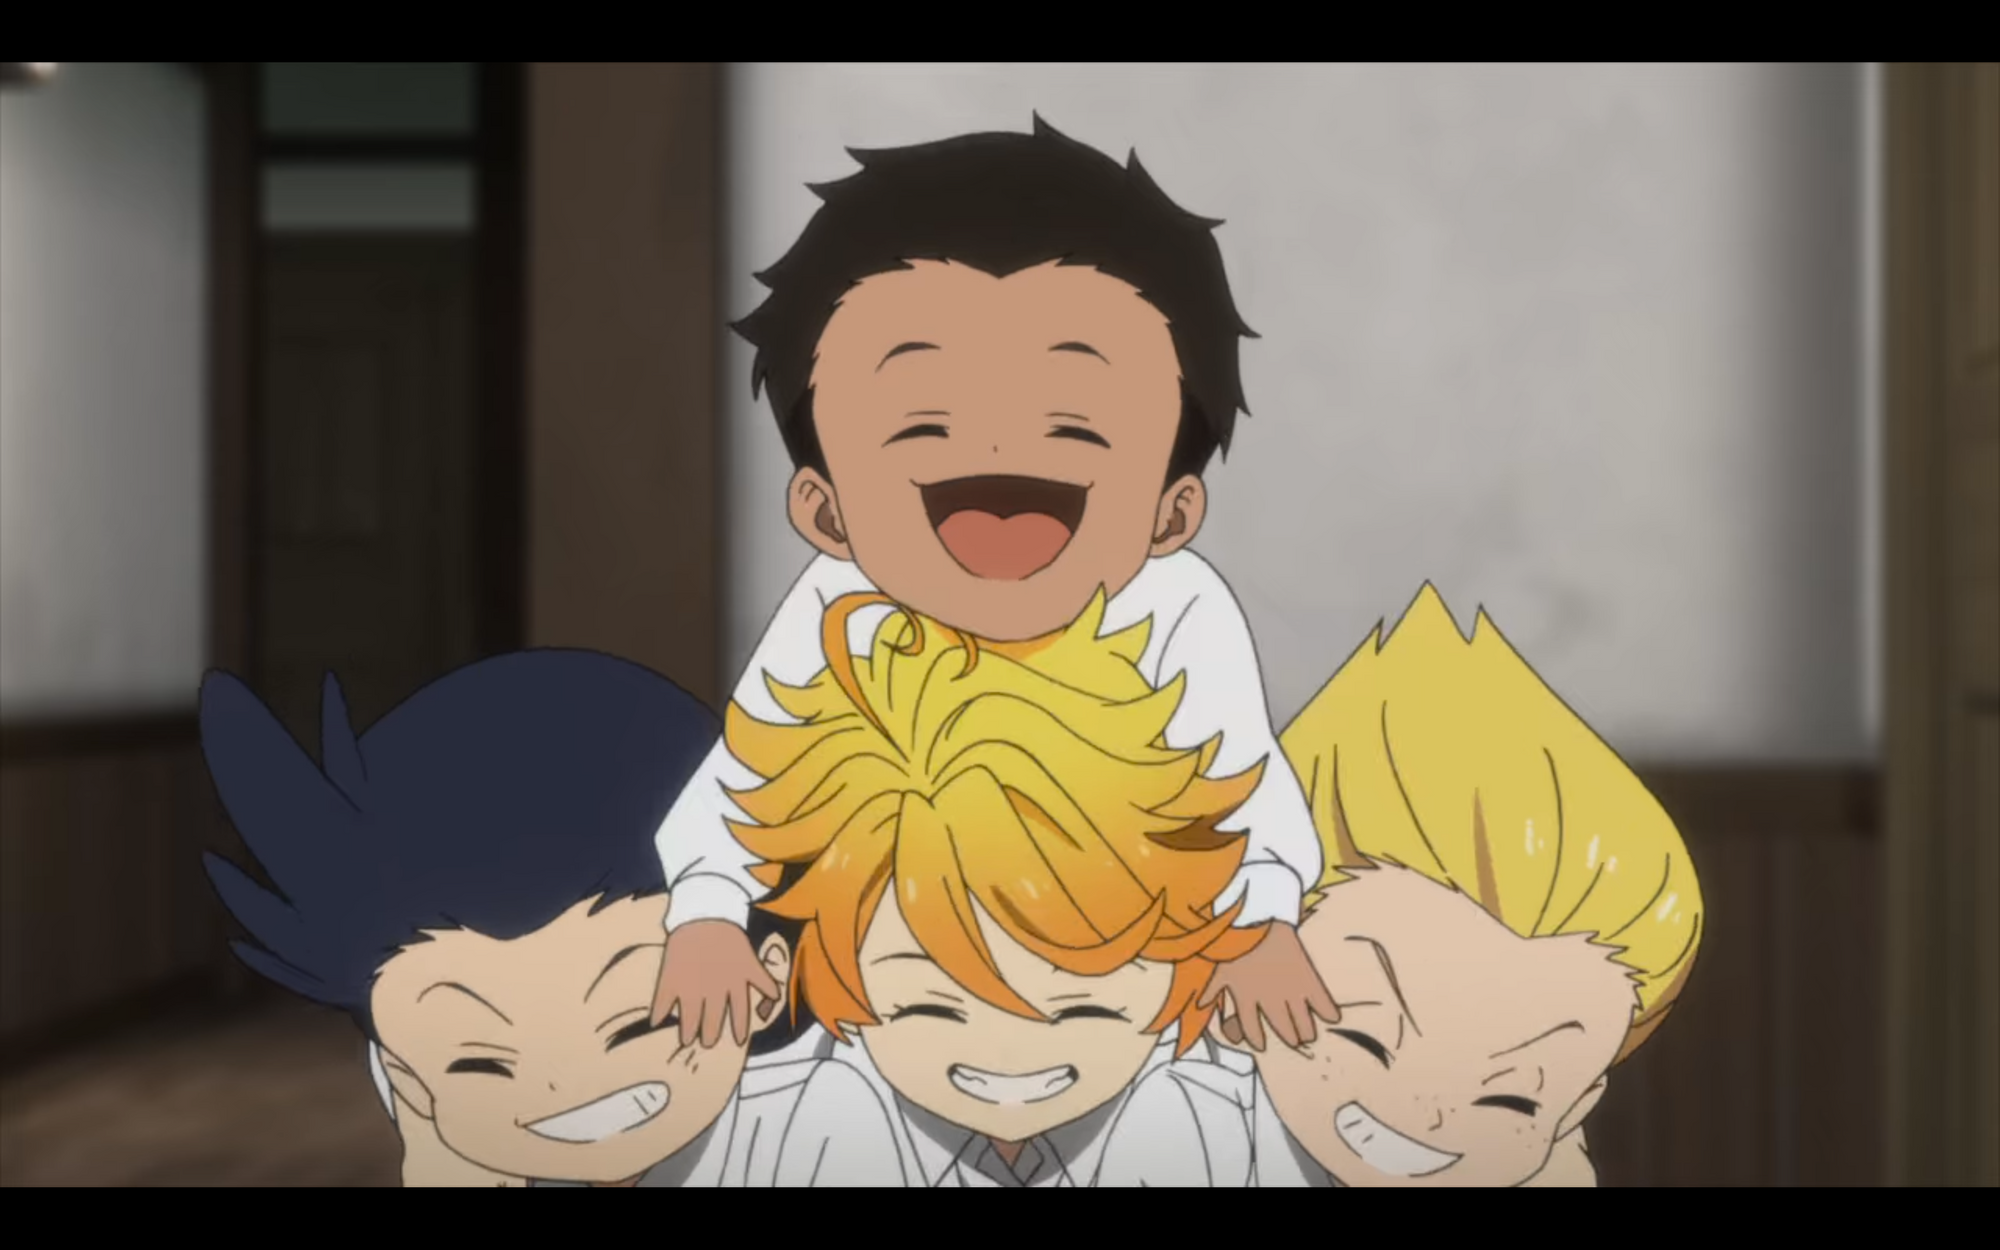 The Promised Neverland S1 Anime Review: Perfect Amount of Creepy